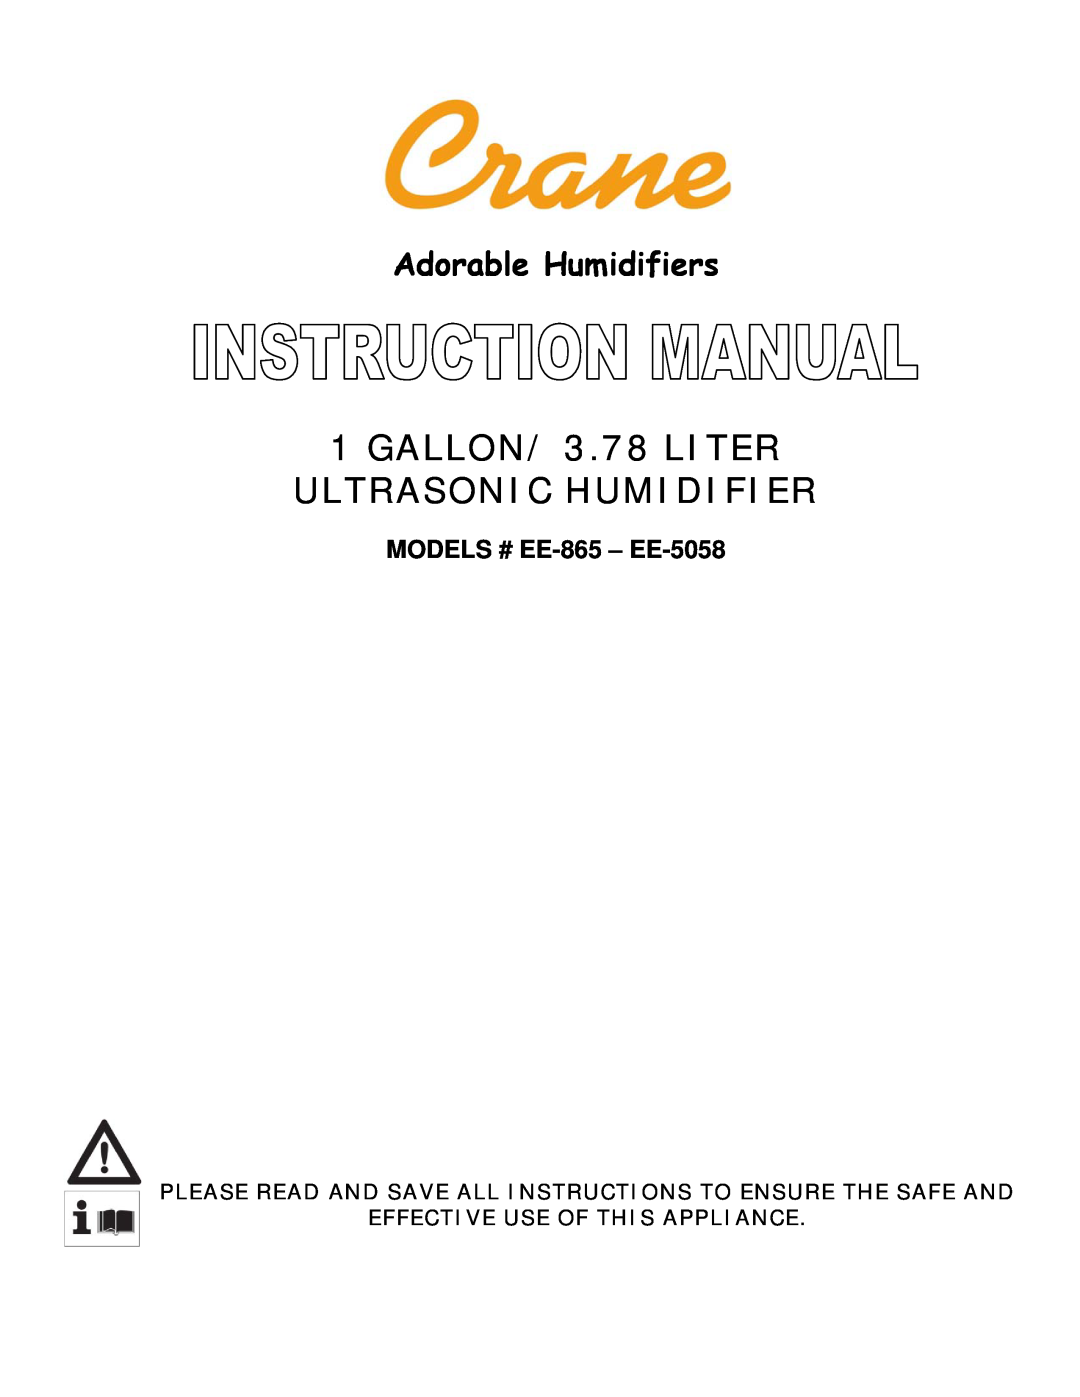 Crane EE-865 manual GALLON/ 3.78 LITER ULTRASONIC HUMIDIFIER, Please Read And Save All Instructions To Ensure The Safe And 